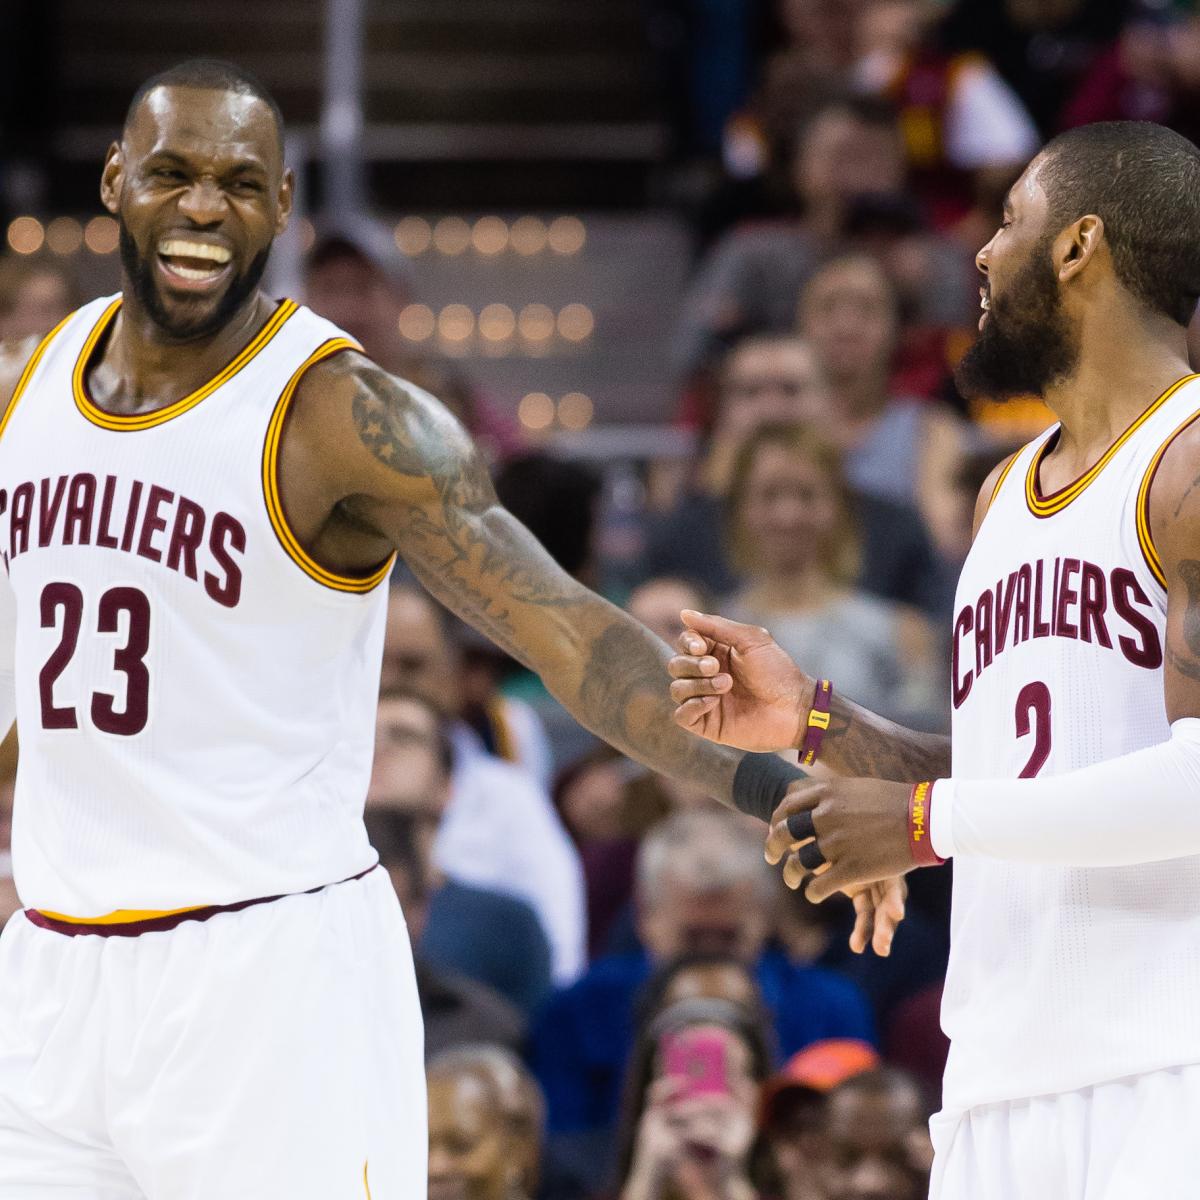 Cleveland Cavaliers 2016-17 roster: Meet the defending NBA Champions 